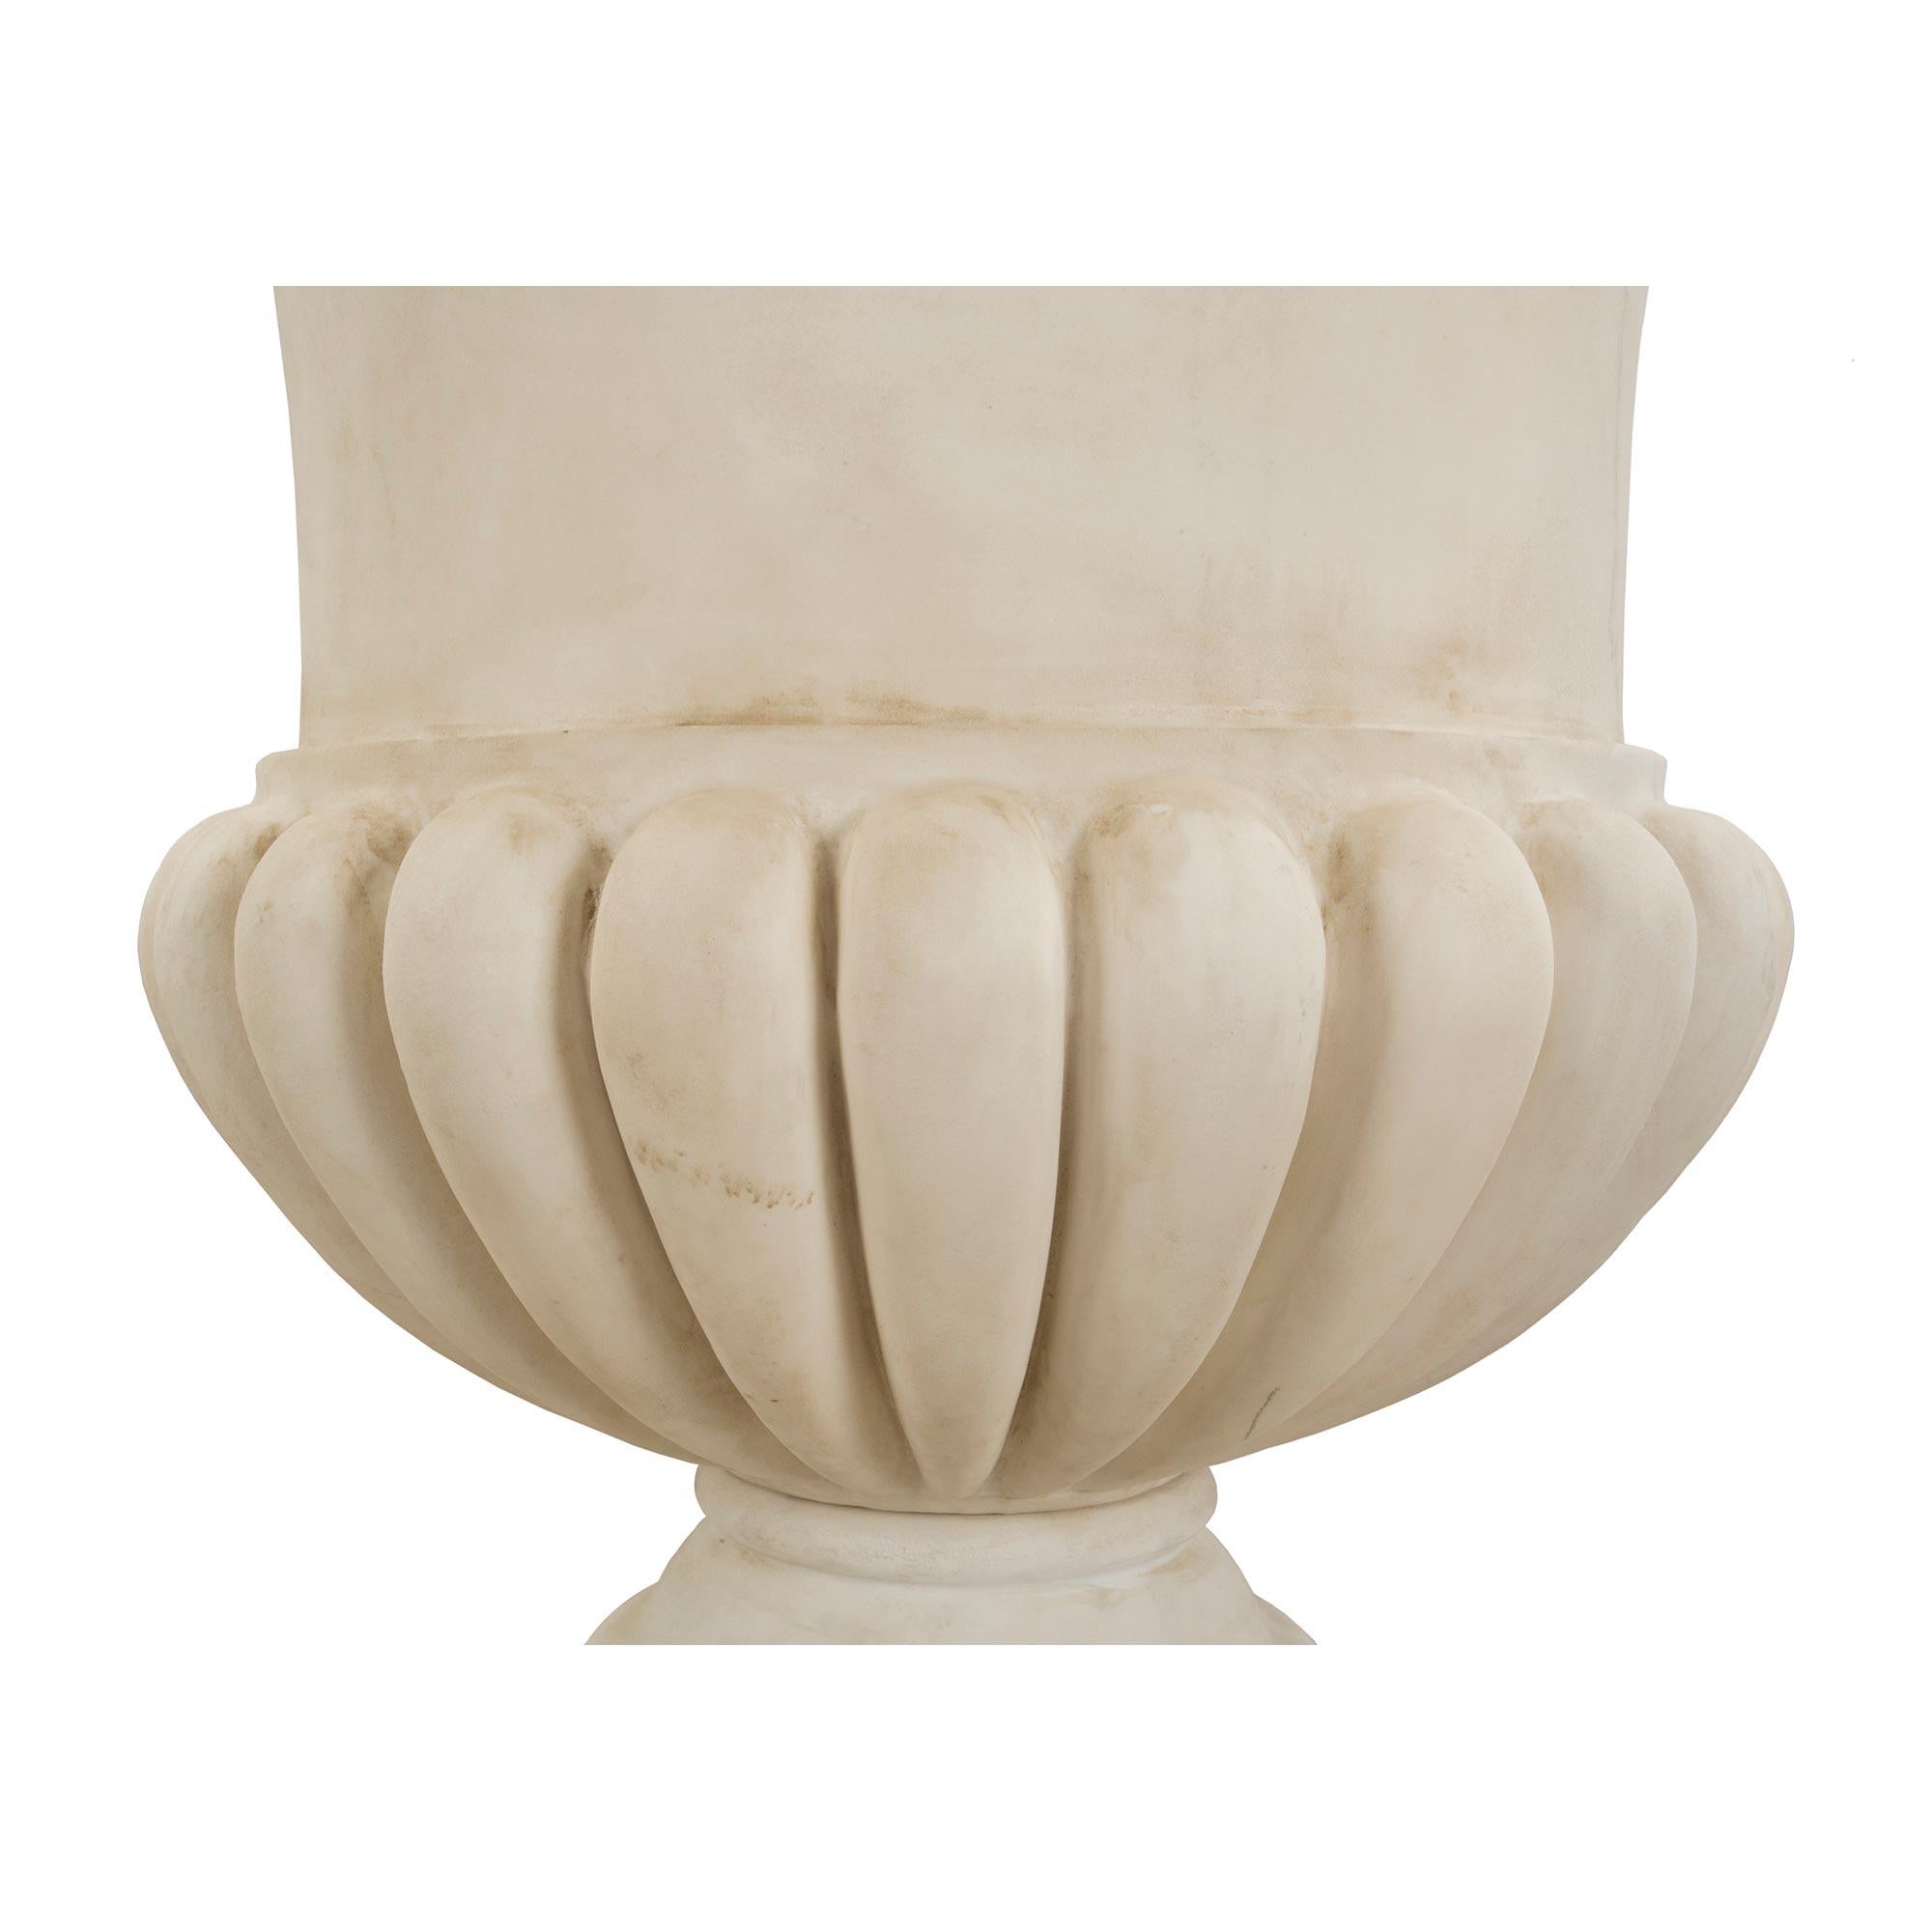 Pair of Italian 19th Century Large Scale White Carrara Marble Urns For Sale 2